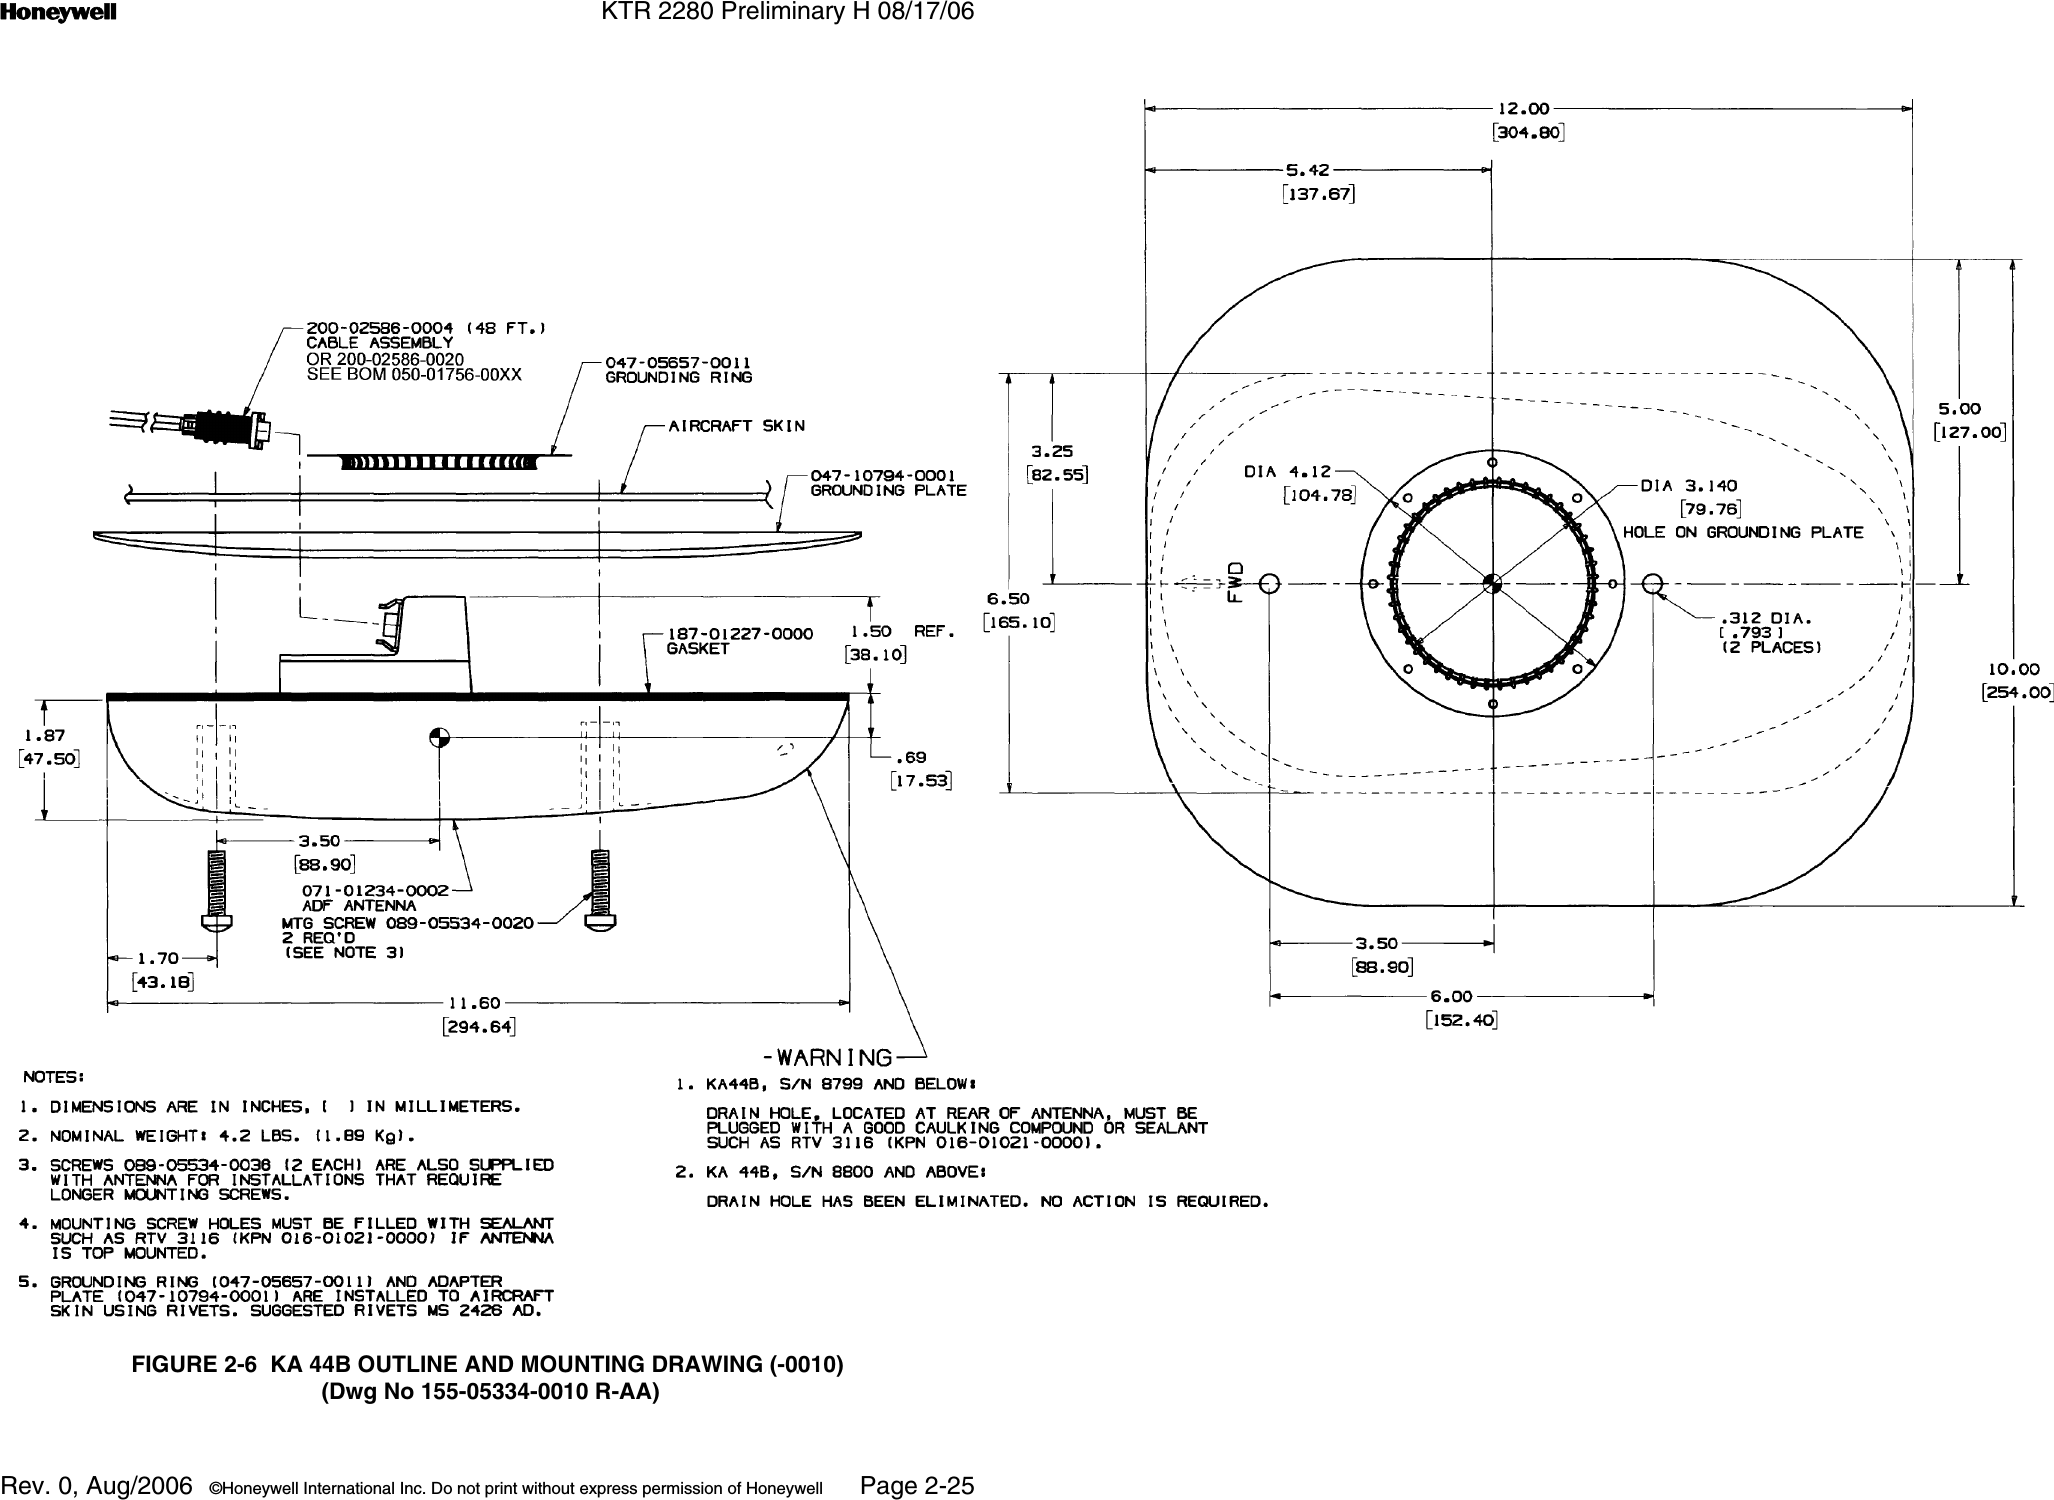 n KTR 2280 Preliminary H 08/17/06Rev. 0, Aug/2006  ©Honeywell International Inc. Do not print without express permission of Honeywell Page 2-25FIGURE 2-6  KA 44B OUTLINE AND MOUNTING DRAWING (-0010) (Dwg No 155-05334-0010 R-AA)